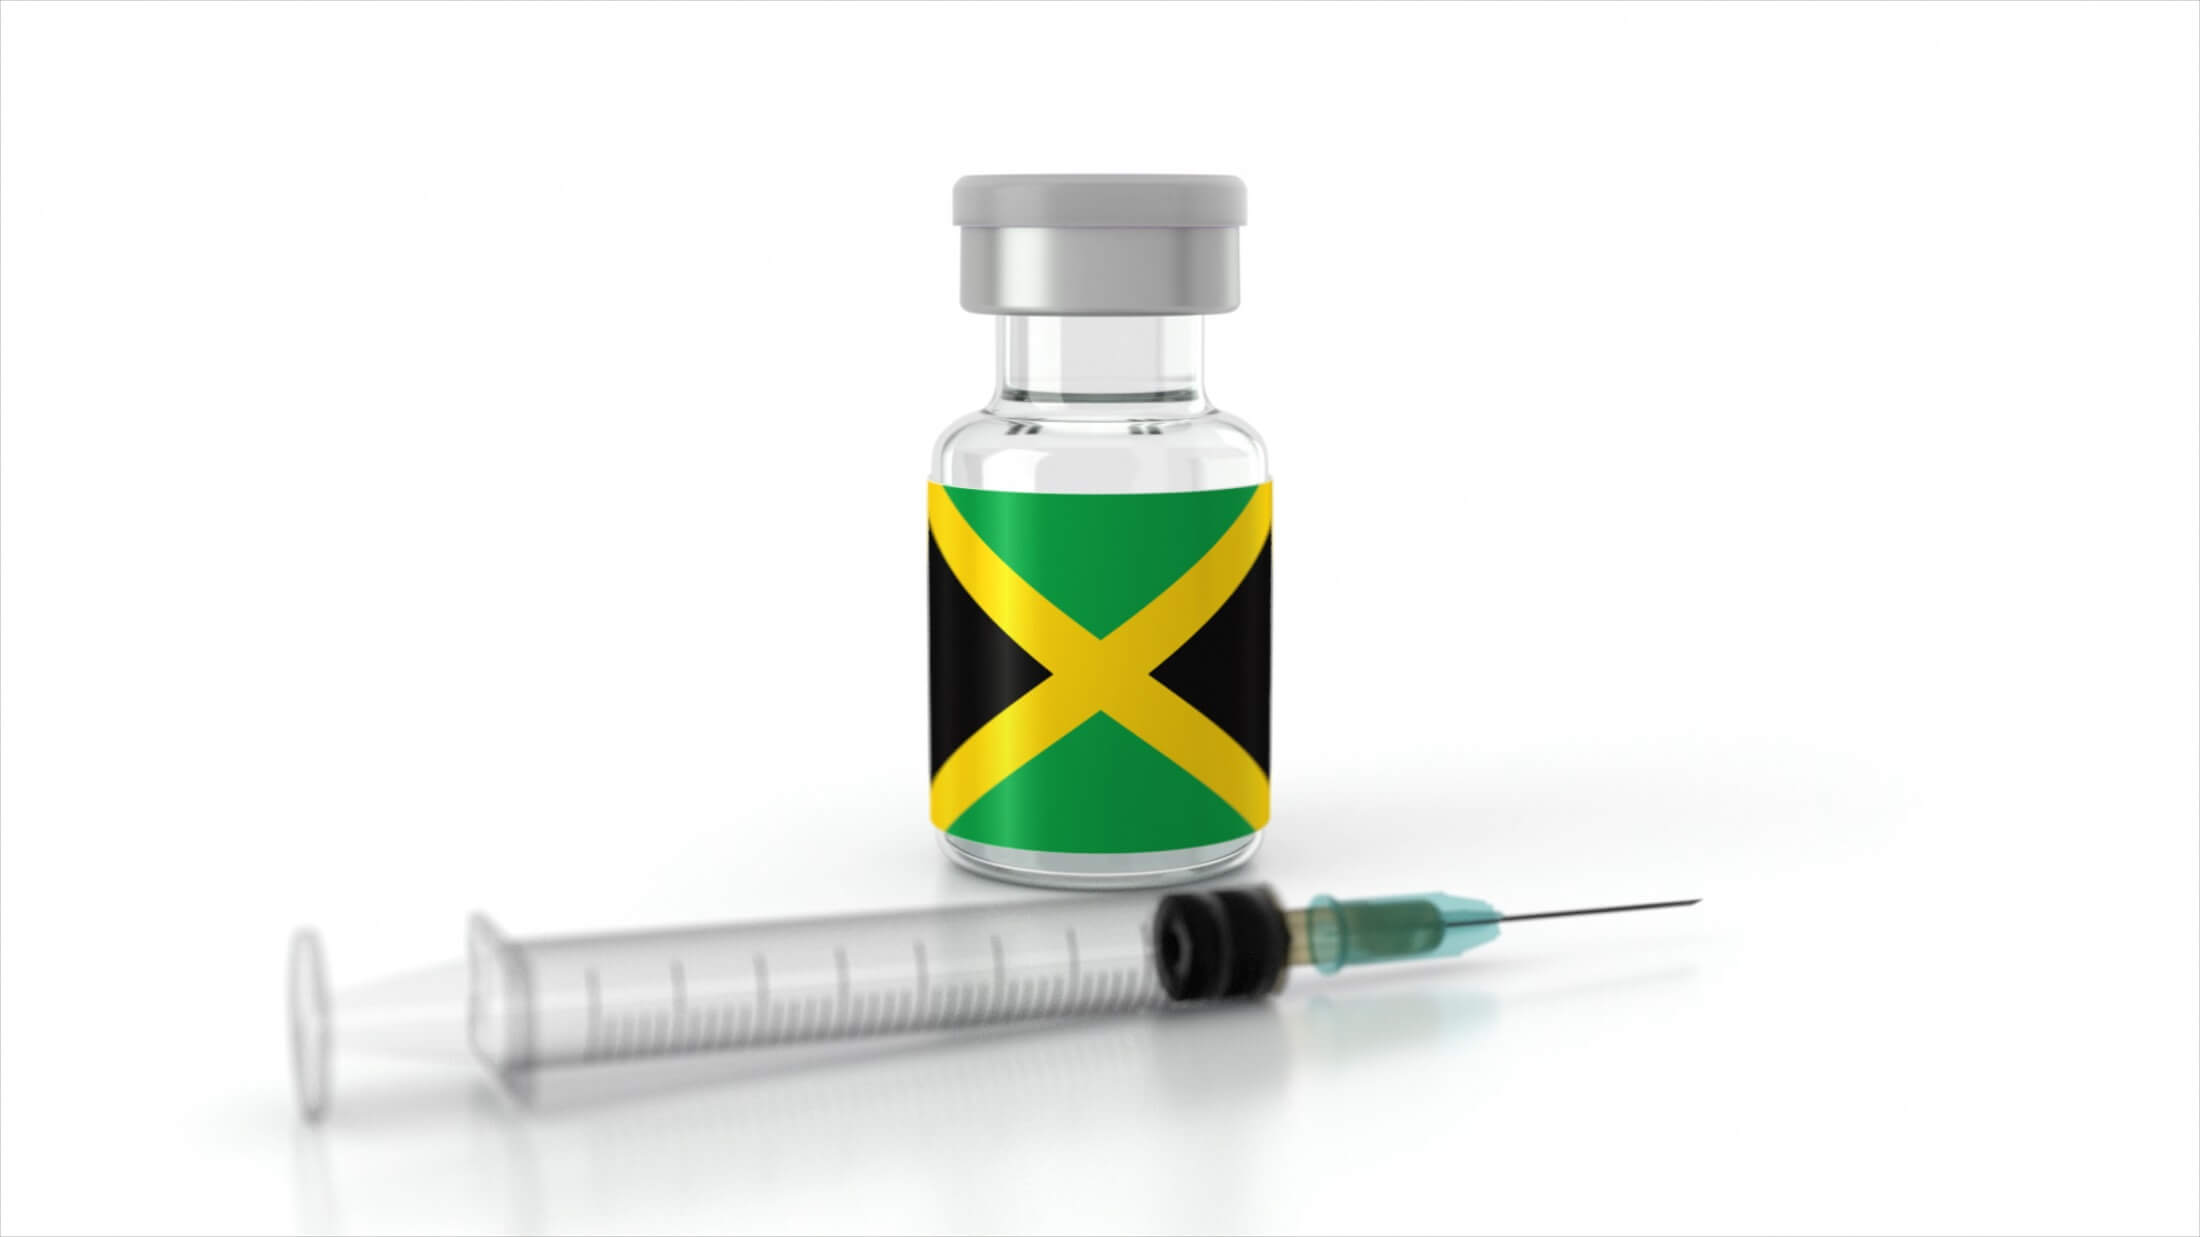 Vaccine Bottles and Syringe isolated on White Background. Healthcare and medical concepts. Coronavirus Vaccine with the flag of Jamaica. Covid vaccination campaign concept in Jamaica.